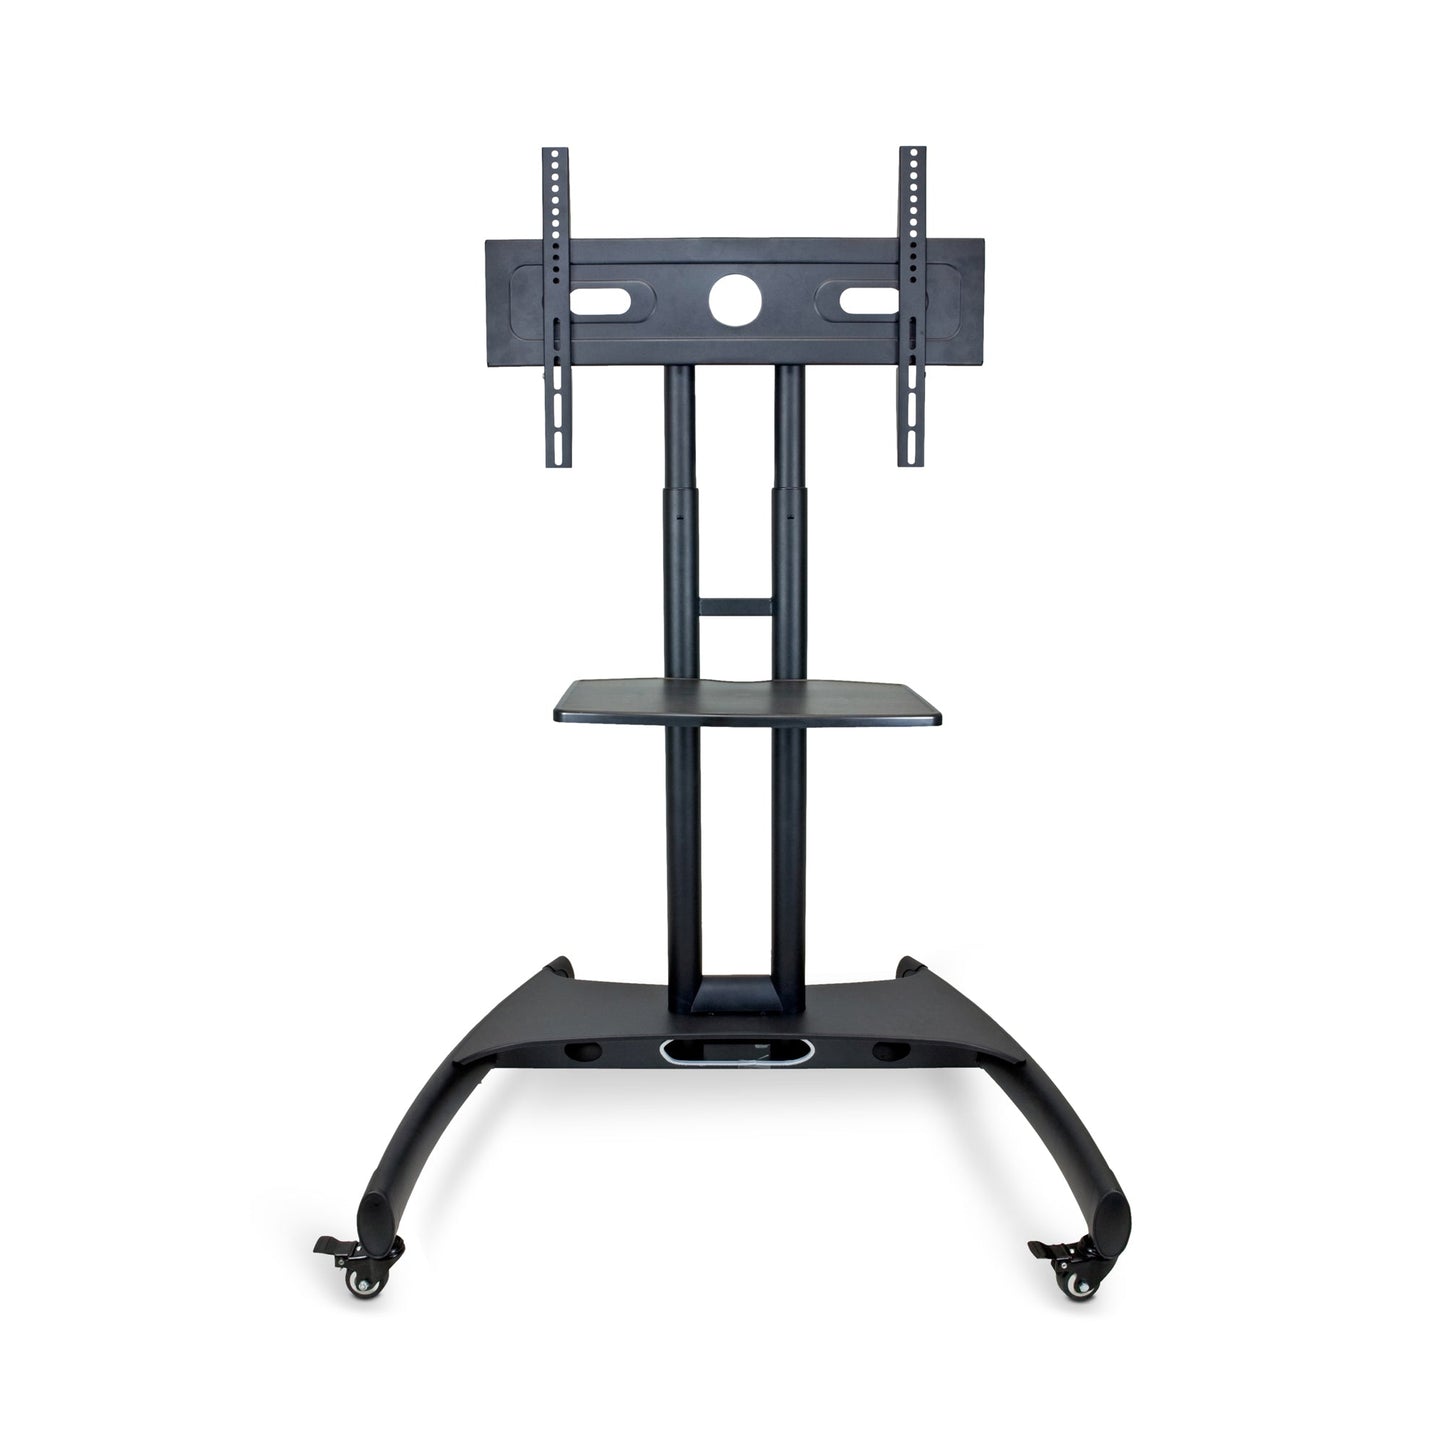 Luxor FP2500 Series Adjustable Flat Panel Cart And Mount - 32" - 60" Height (Luxor LUX-FP2500) - SchoolOutlet